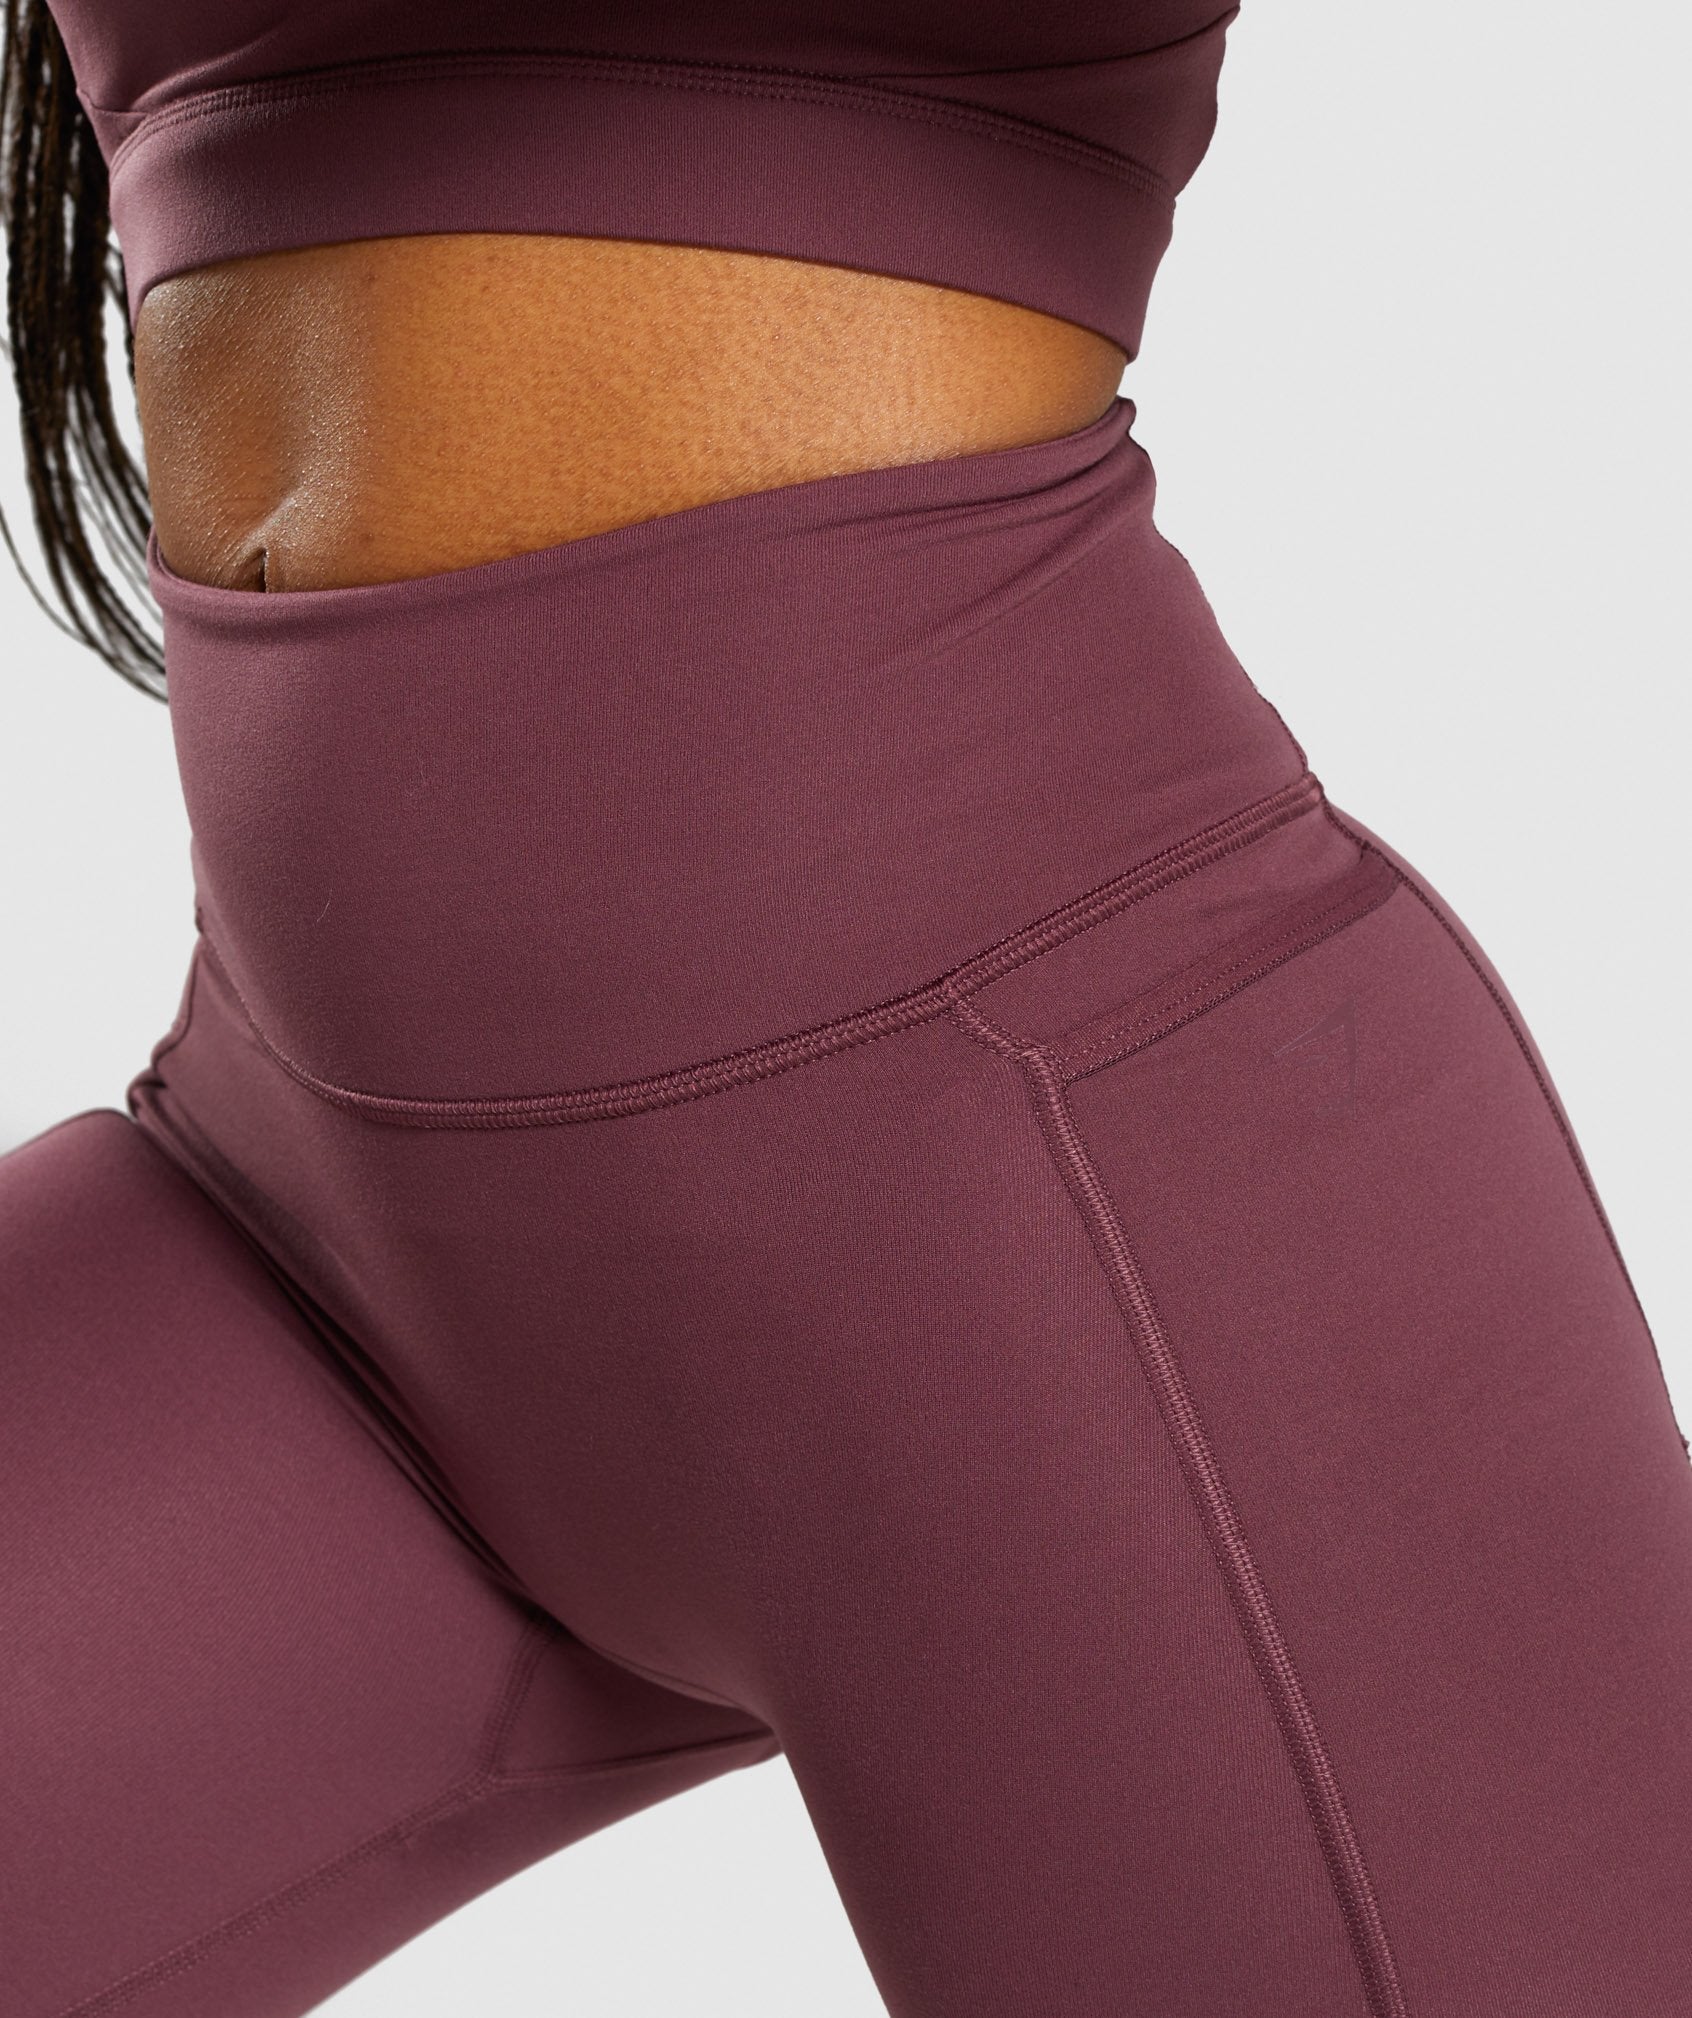 Speed Leggings in Berry Red - view 5